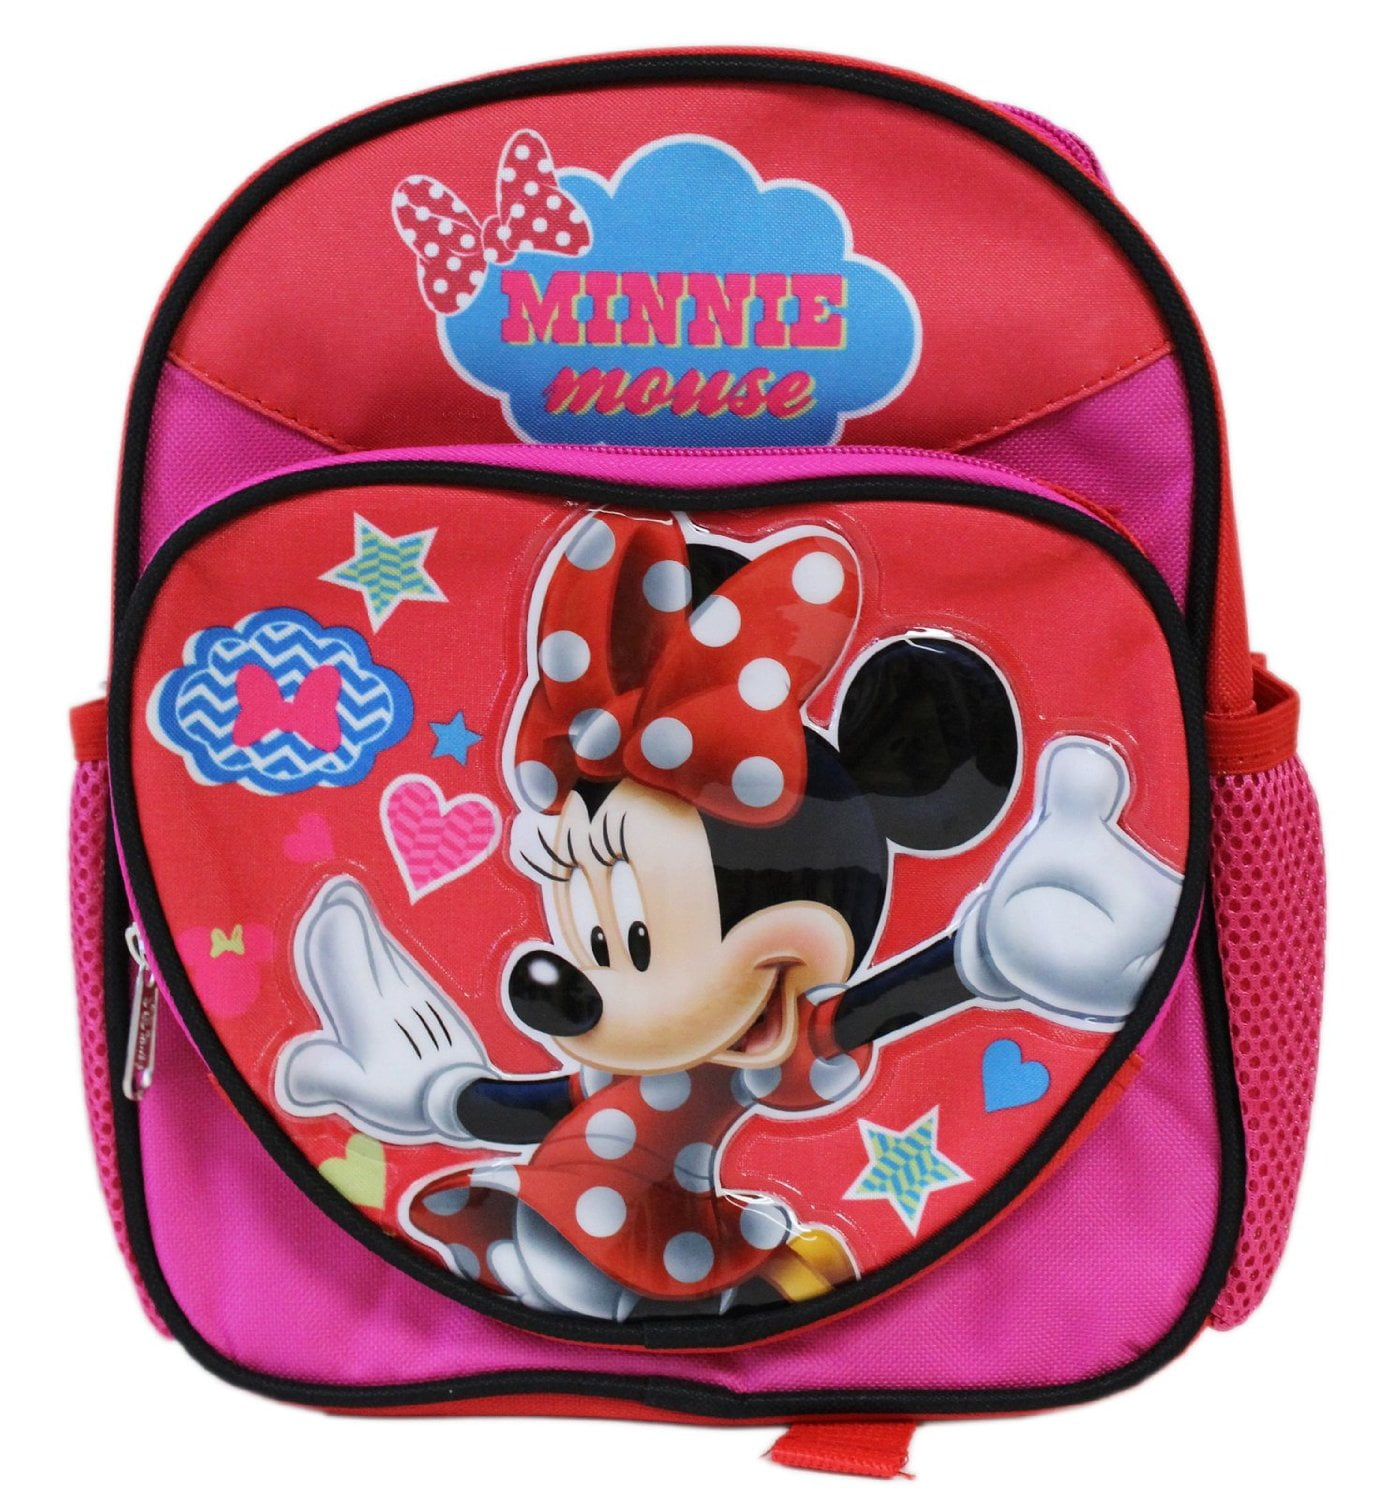 Mini Backpack Minnie Mouse Heart Red 10 School Bag New 641399